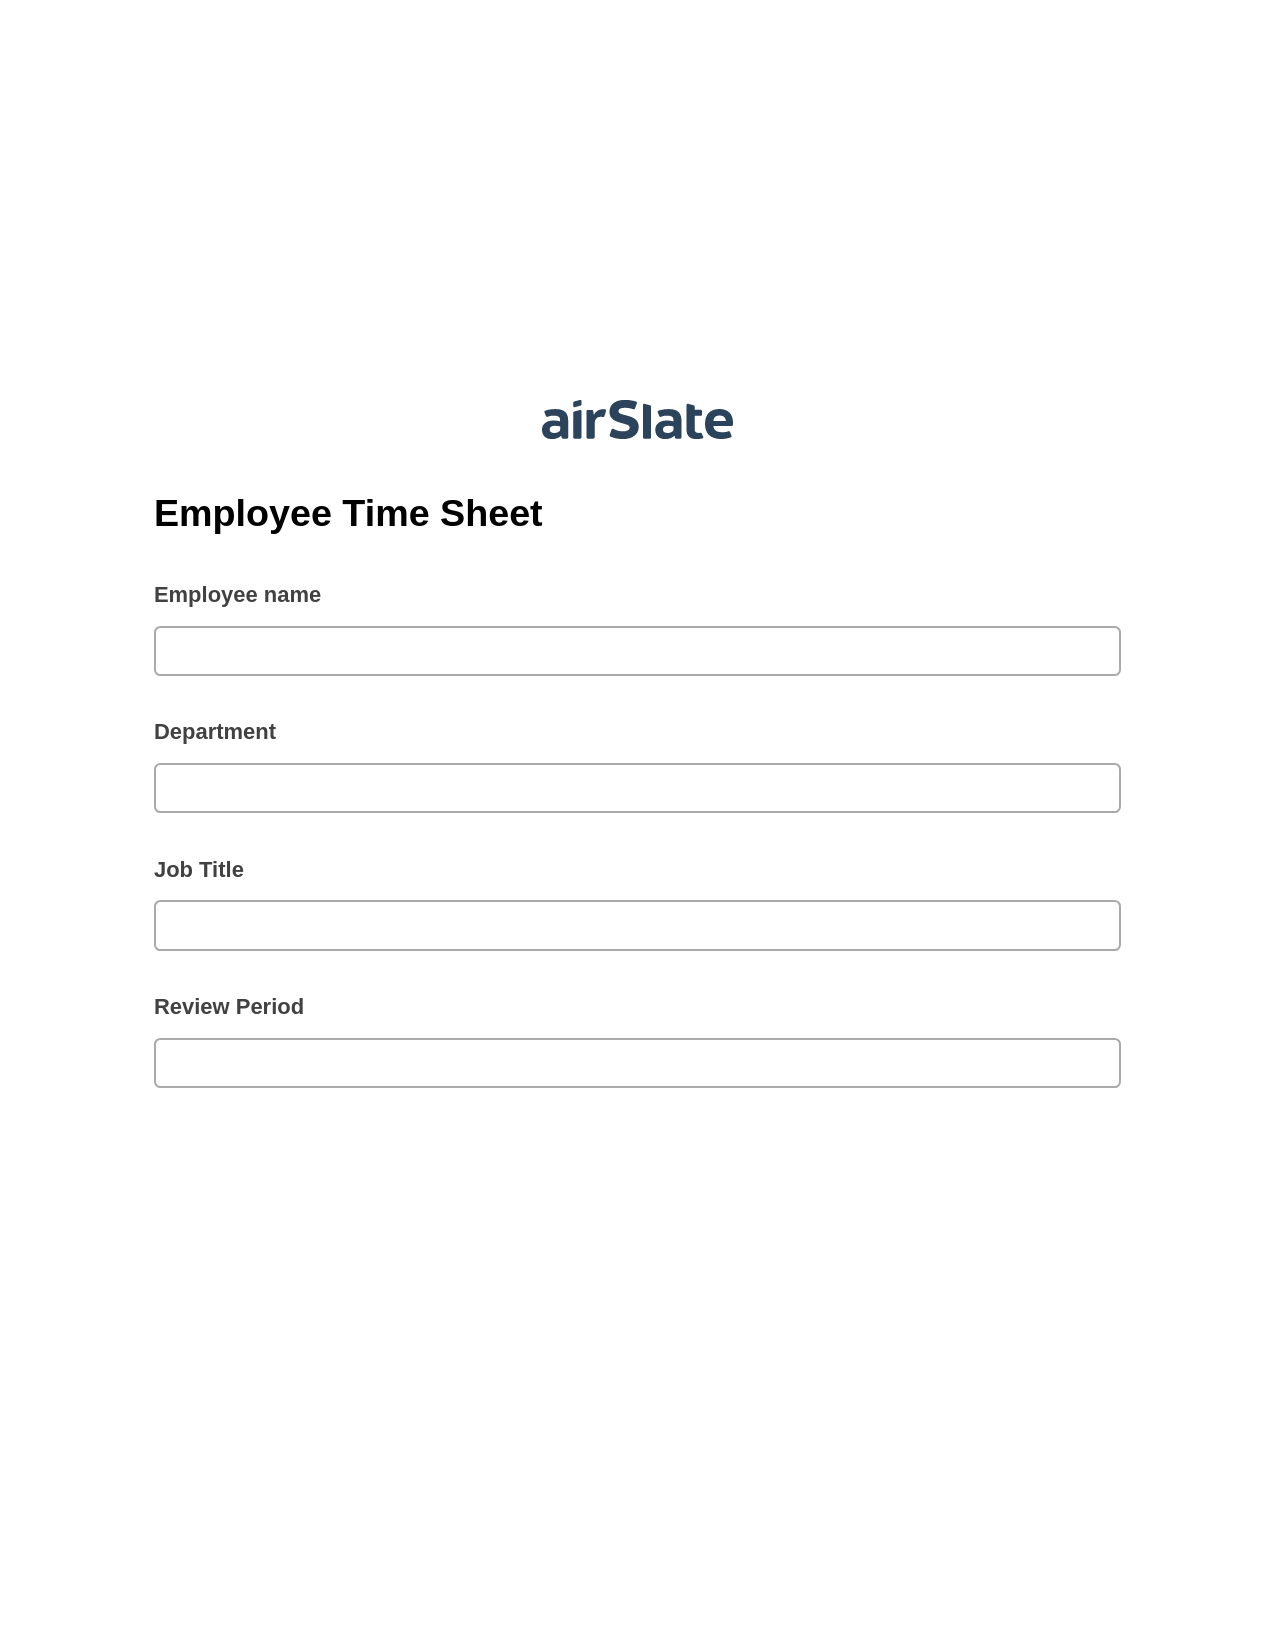 Multirole Employee Time Sheet Pre-fill Dropdowns from Airtable, Create Salesforce Records Bot, Post-finish Document Bot